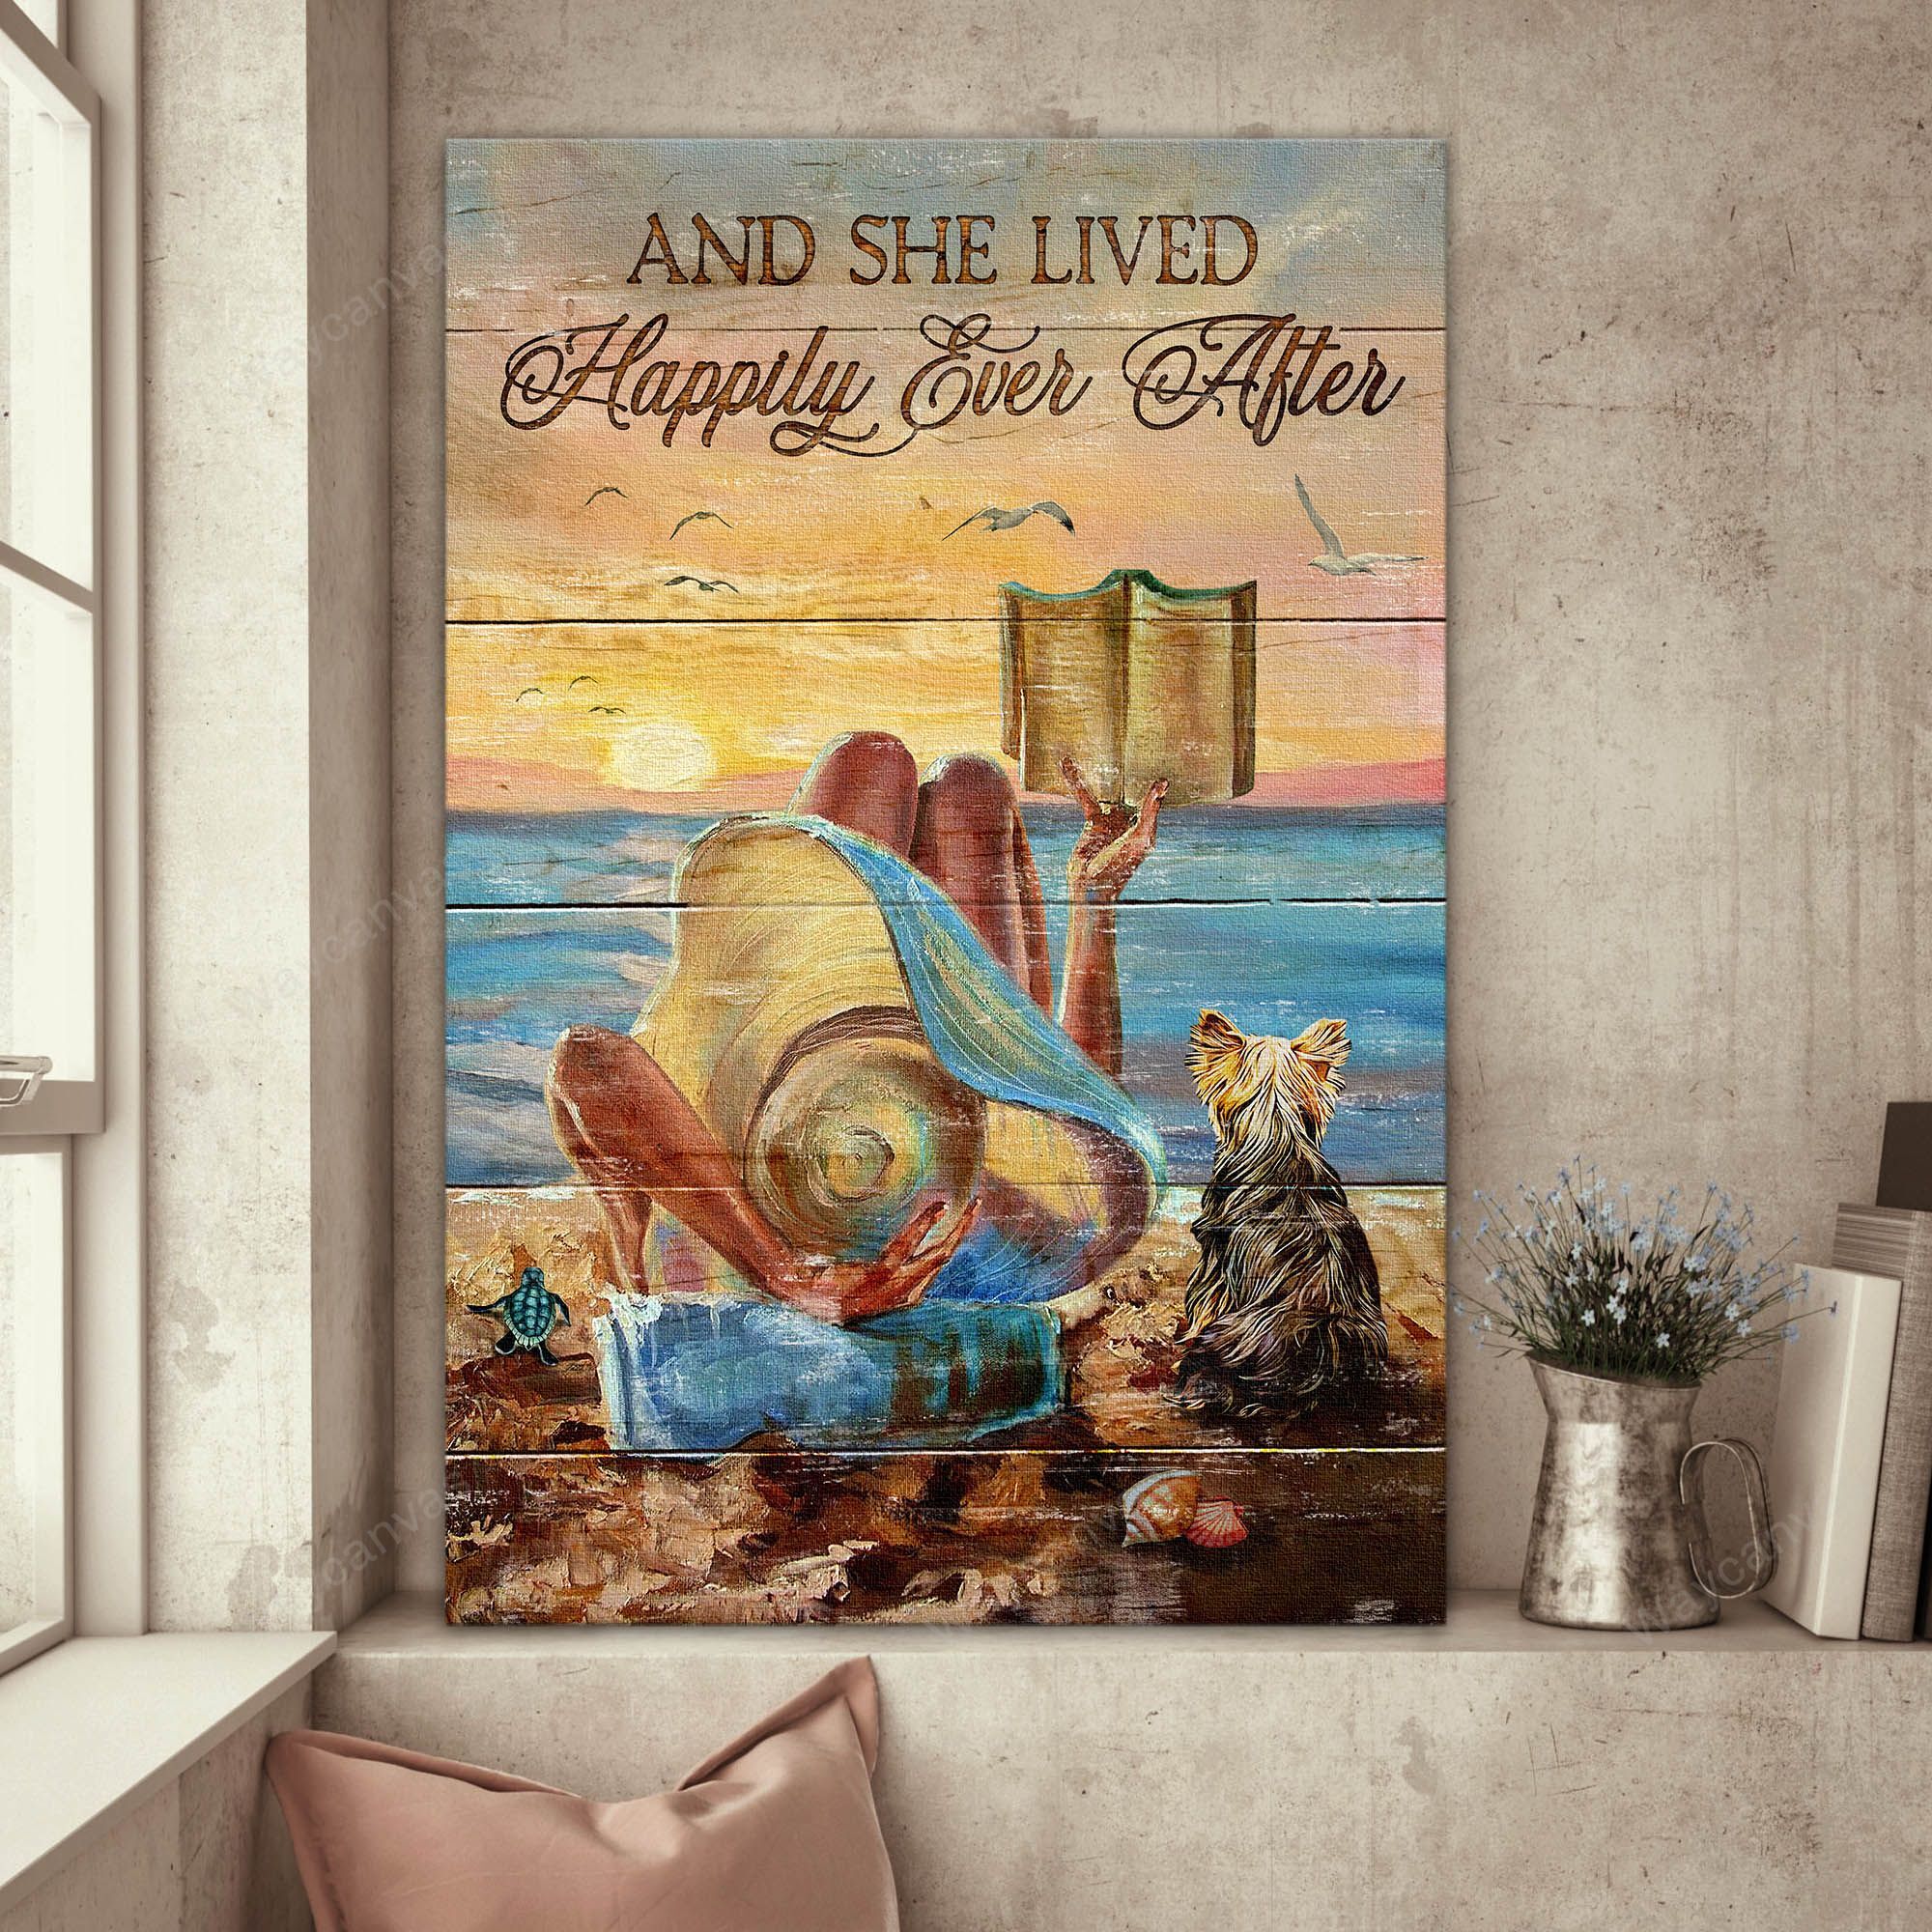 Beach Landscape, Horizon, Yorkshire, Beautiful Girl, And she lived happily with her Yorkshire - Yorkshire Portrait Canvas Prints, Wall Art